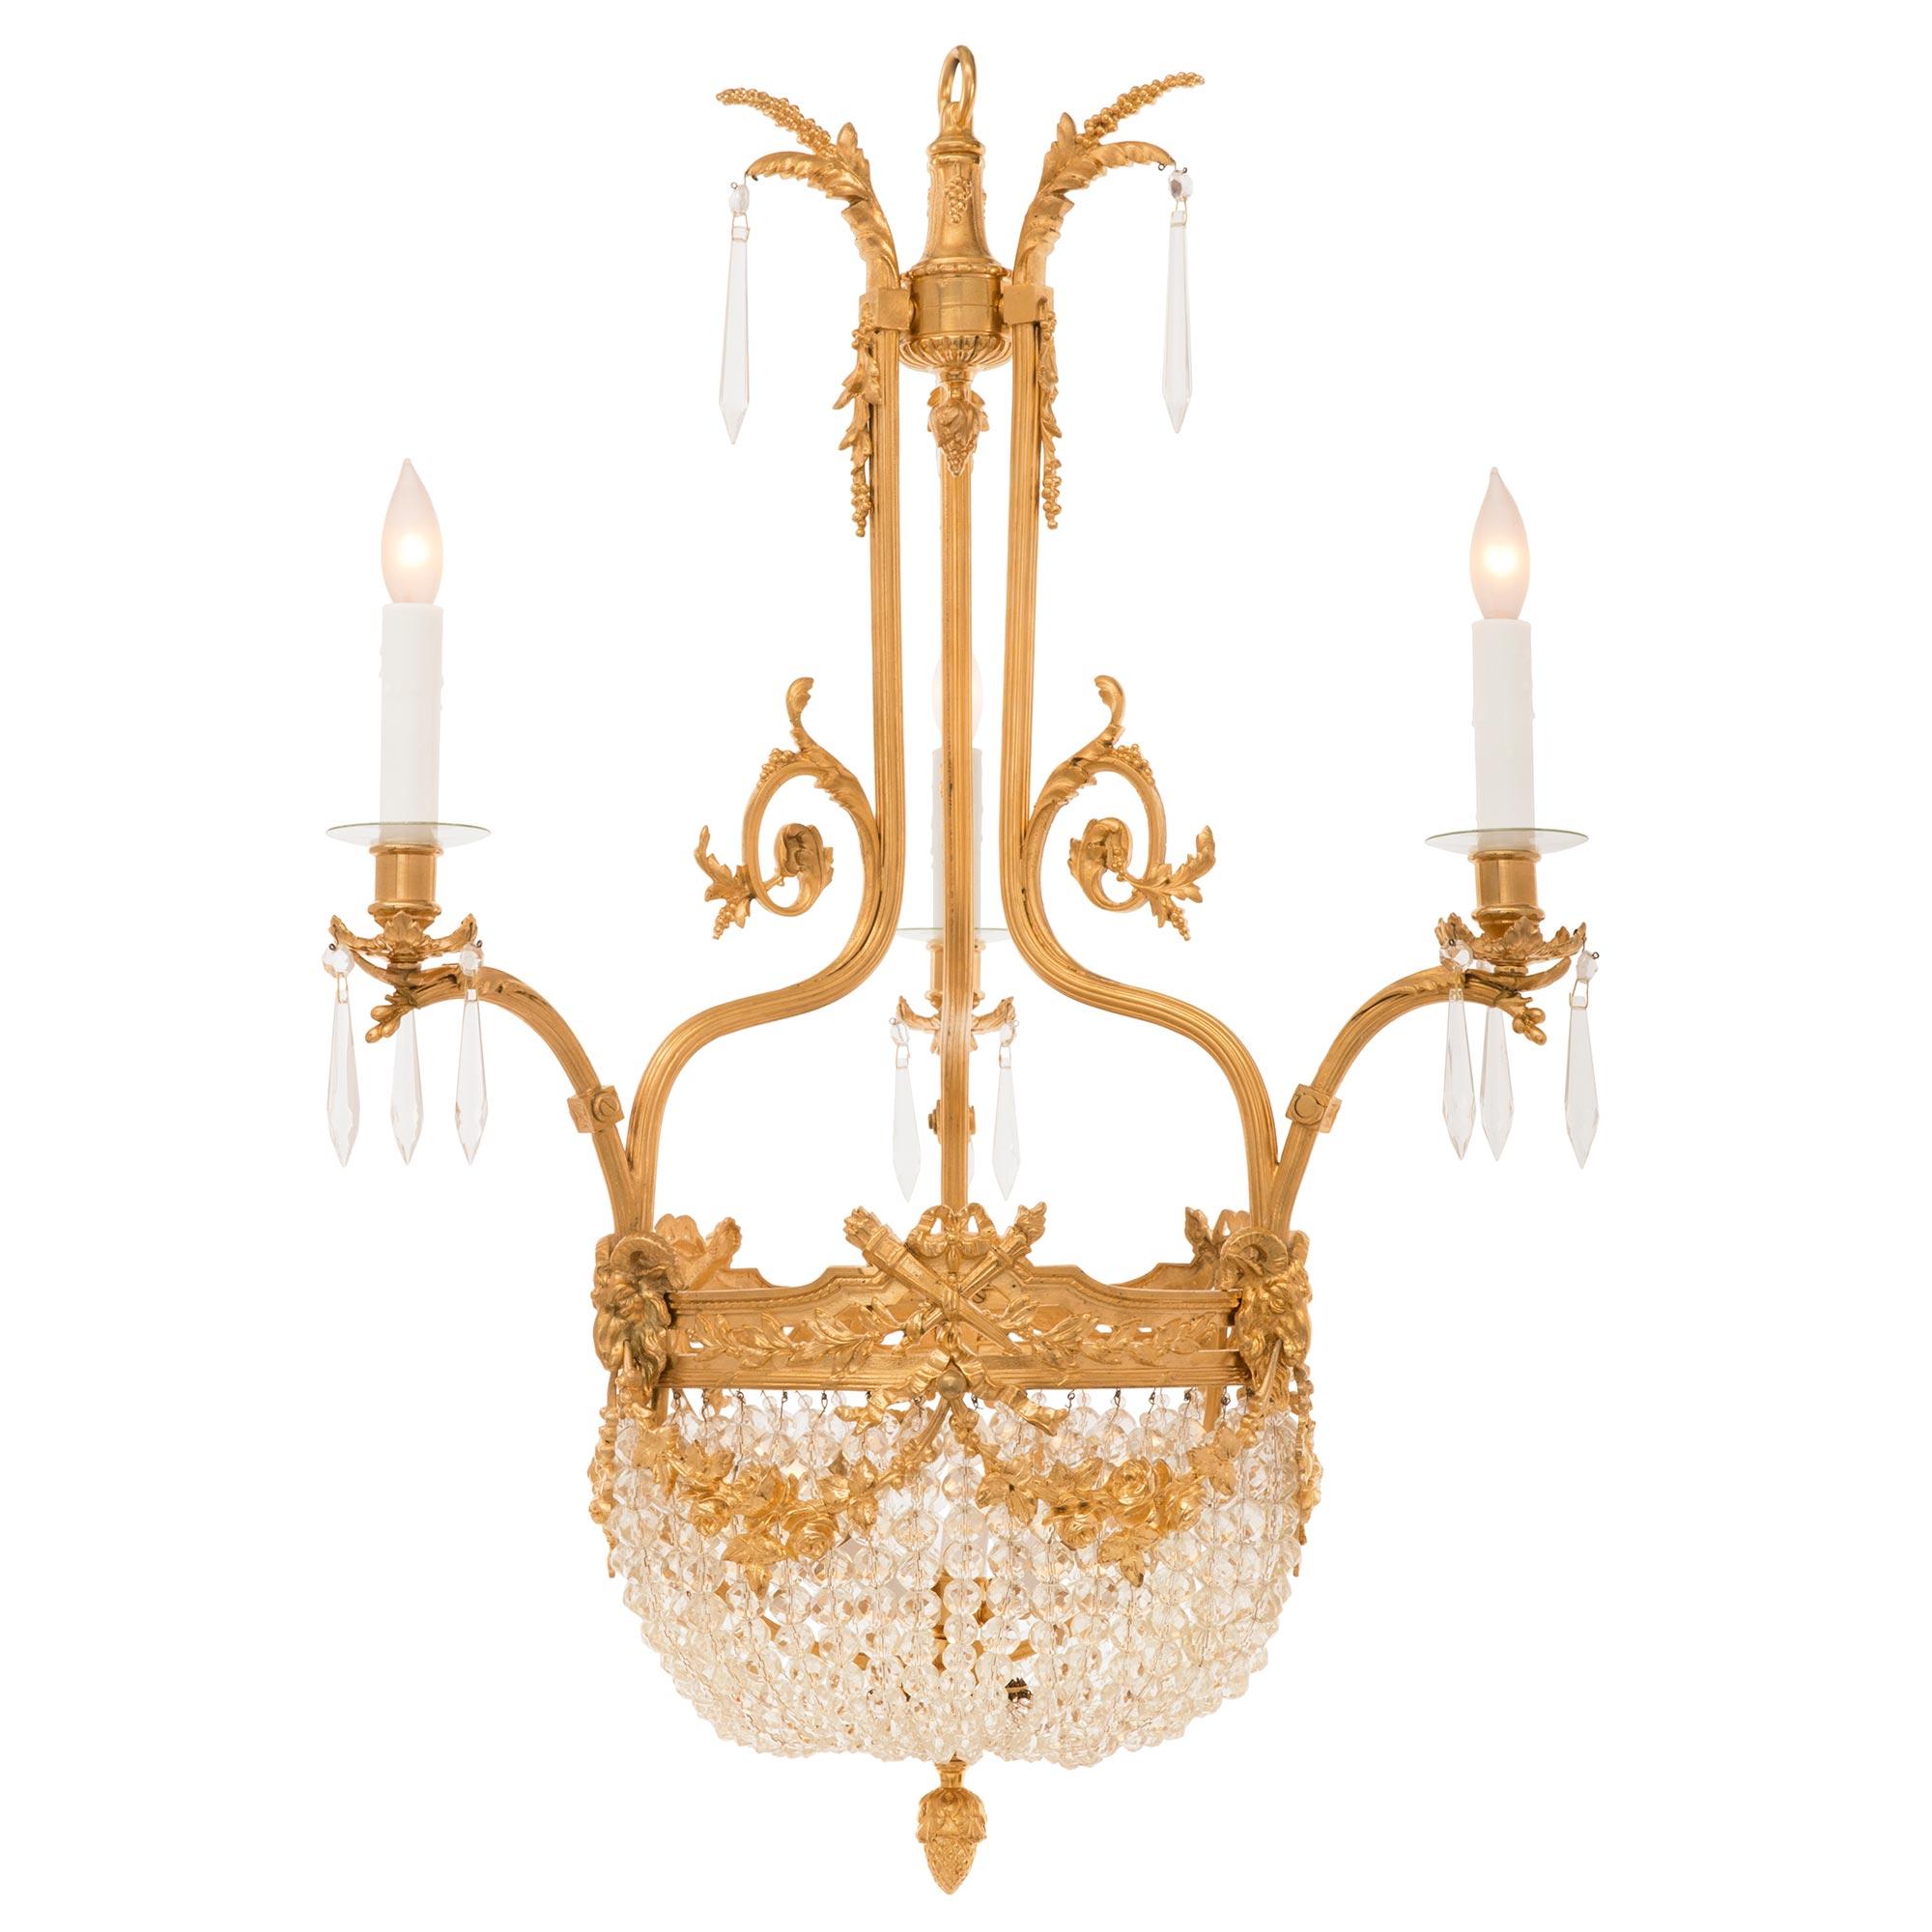 A beautiful and unique French 19th century Louis XVI st. ormolu and crystal chandelier. The three arm six light chandelier is centered by a charming finely detailed bottom acorn finial below most decorative balloon shaped beaded crystal garlands.